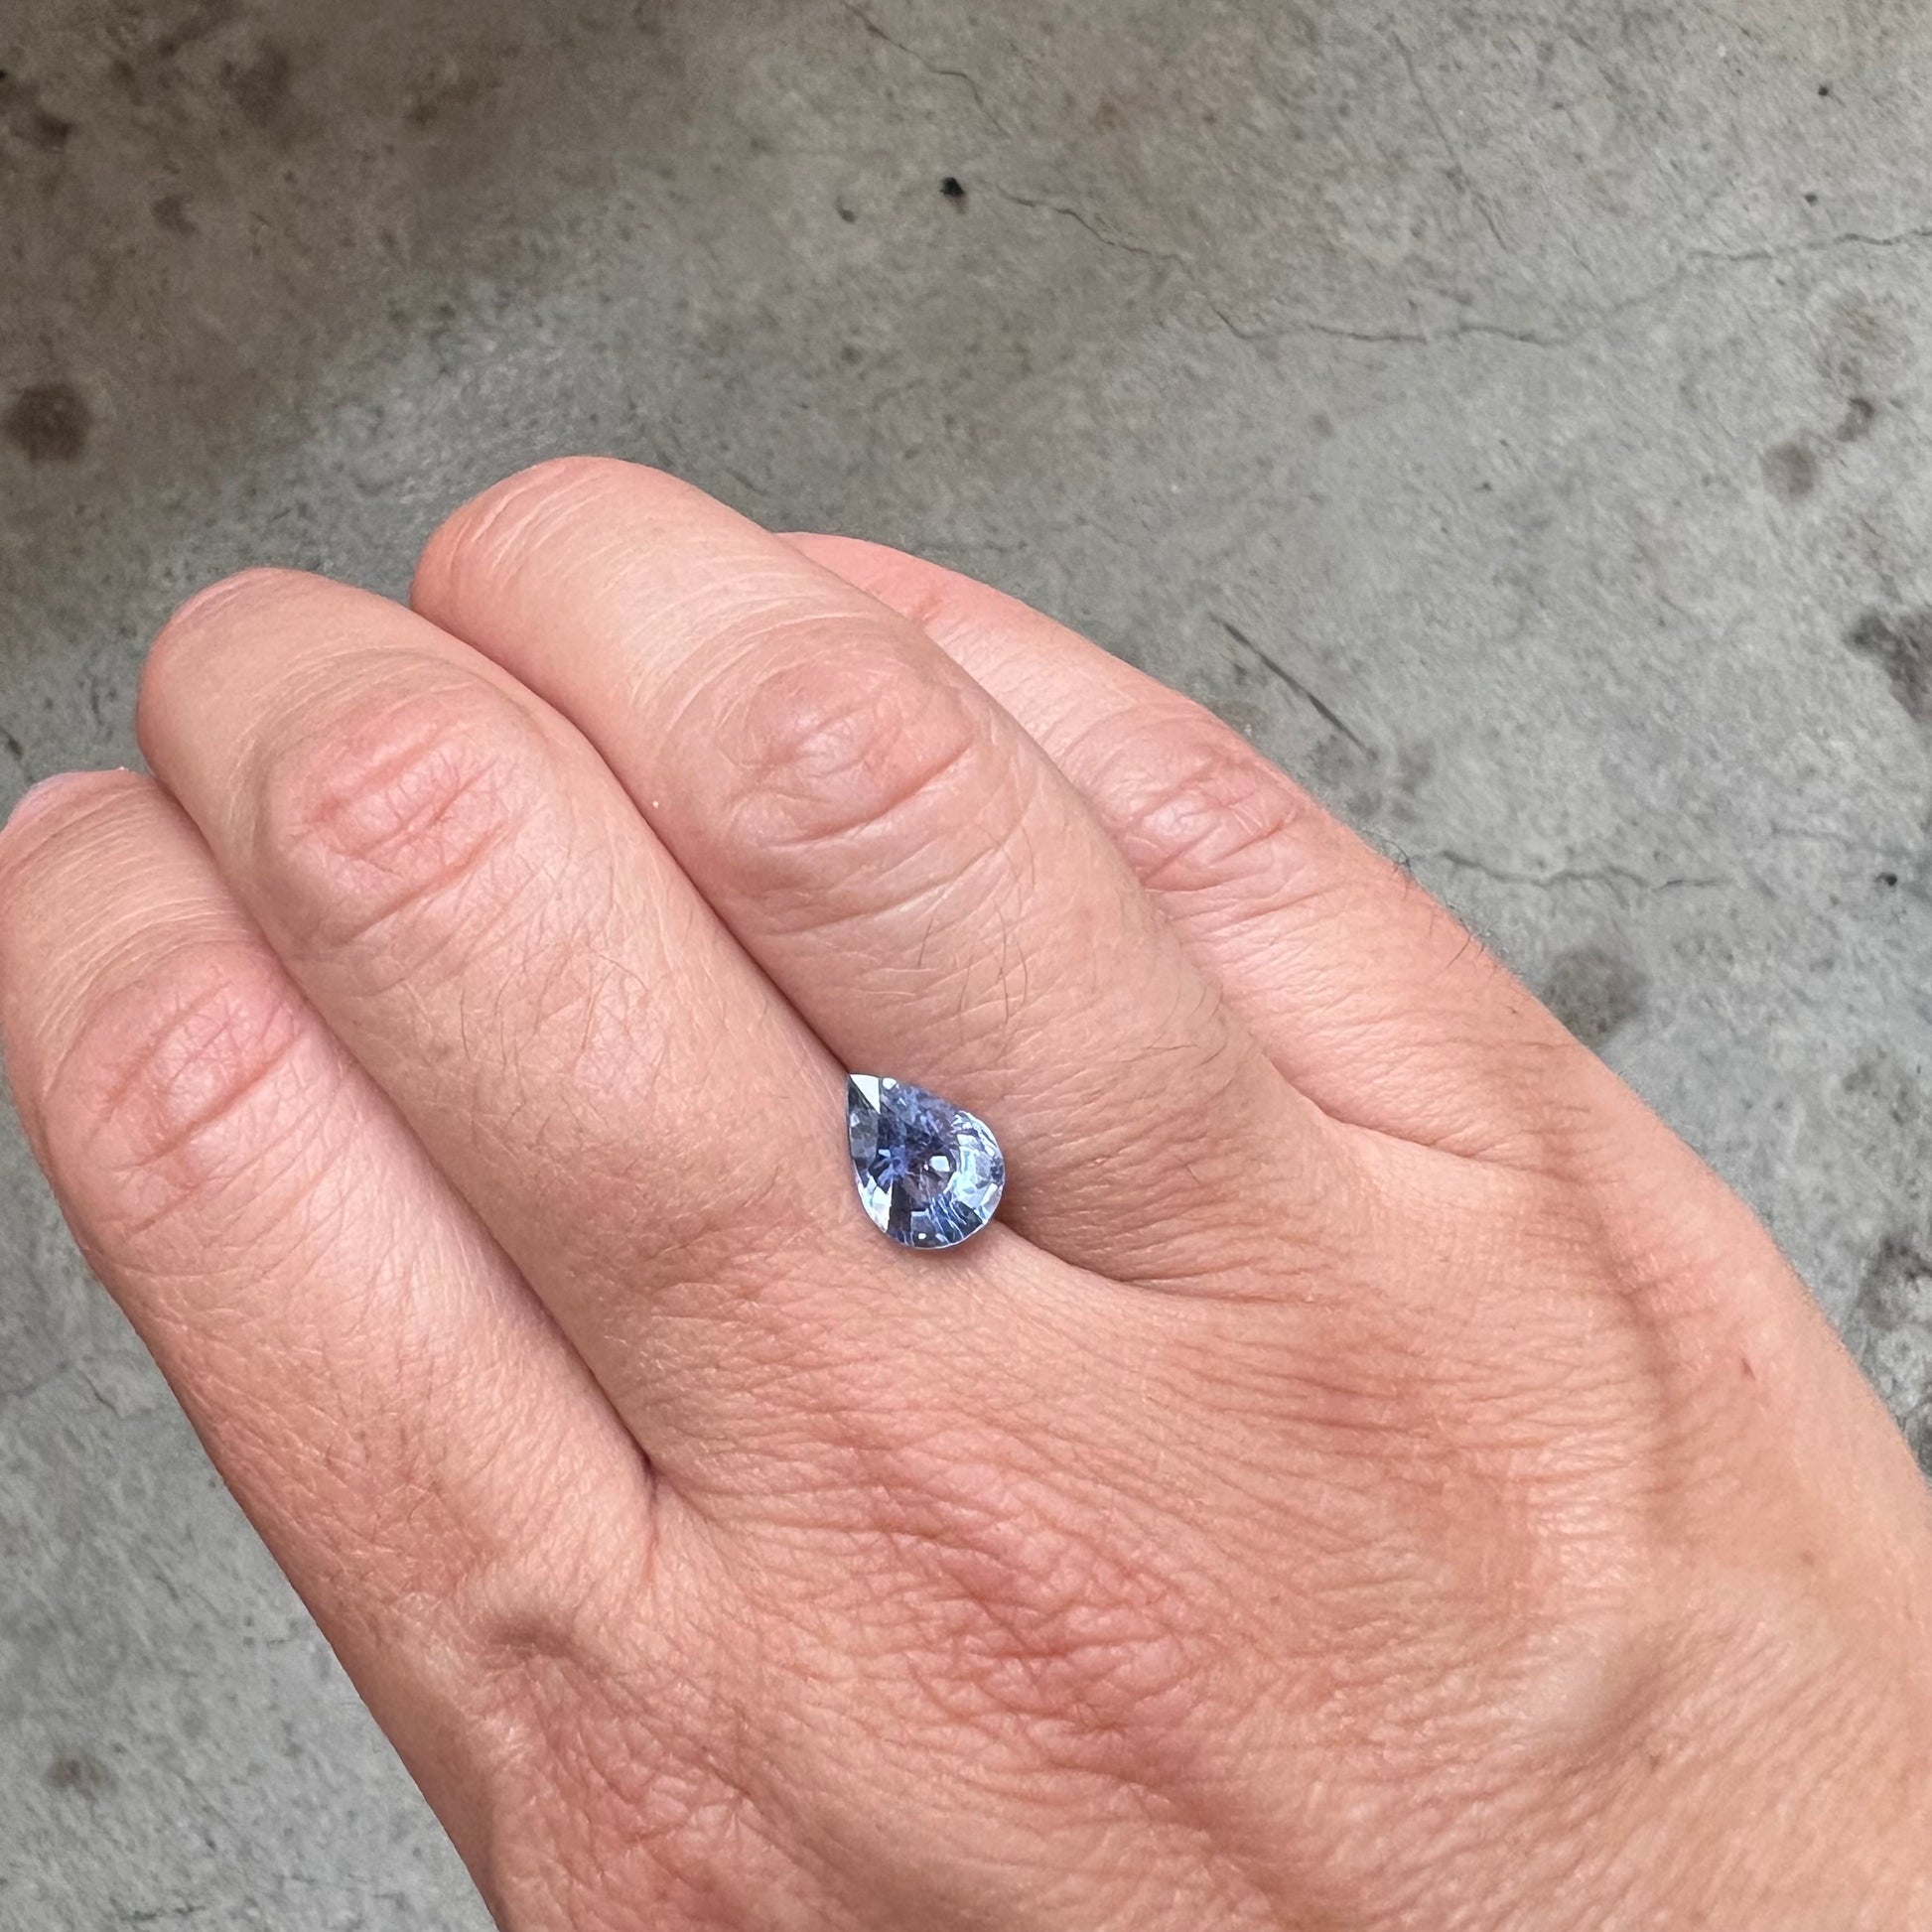 Buy 6ct Sky Blue Sapphire Ring. GIA Certified Pear Cut Ceylon Blue Sapphire  Ring. 14k Rose Gold Diamond Ring. Right Hand Ring by Eidelprecious. Online  in India - Etsy